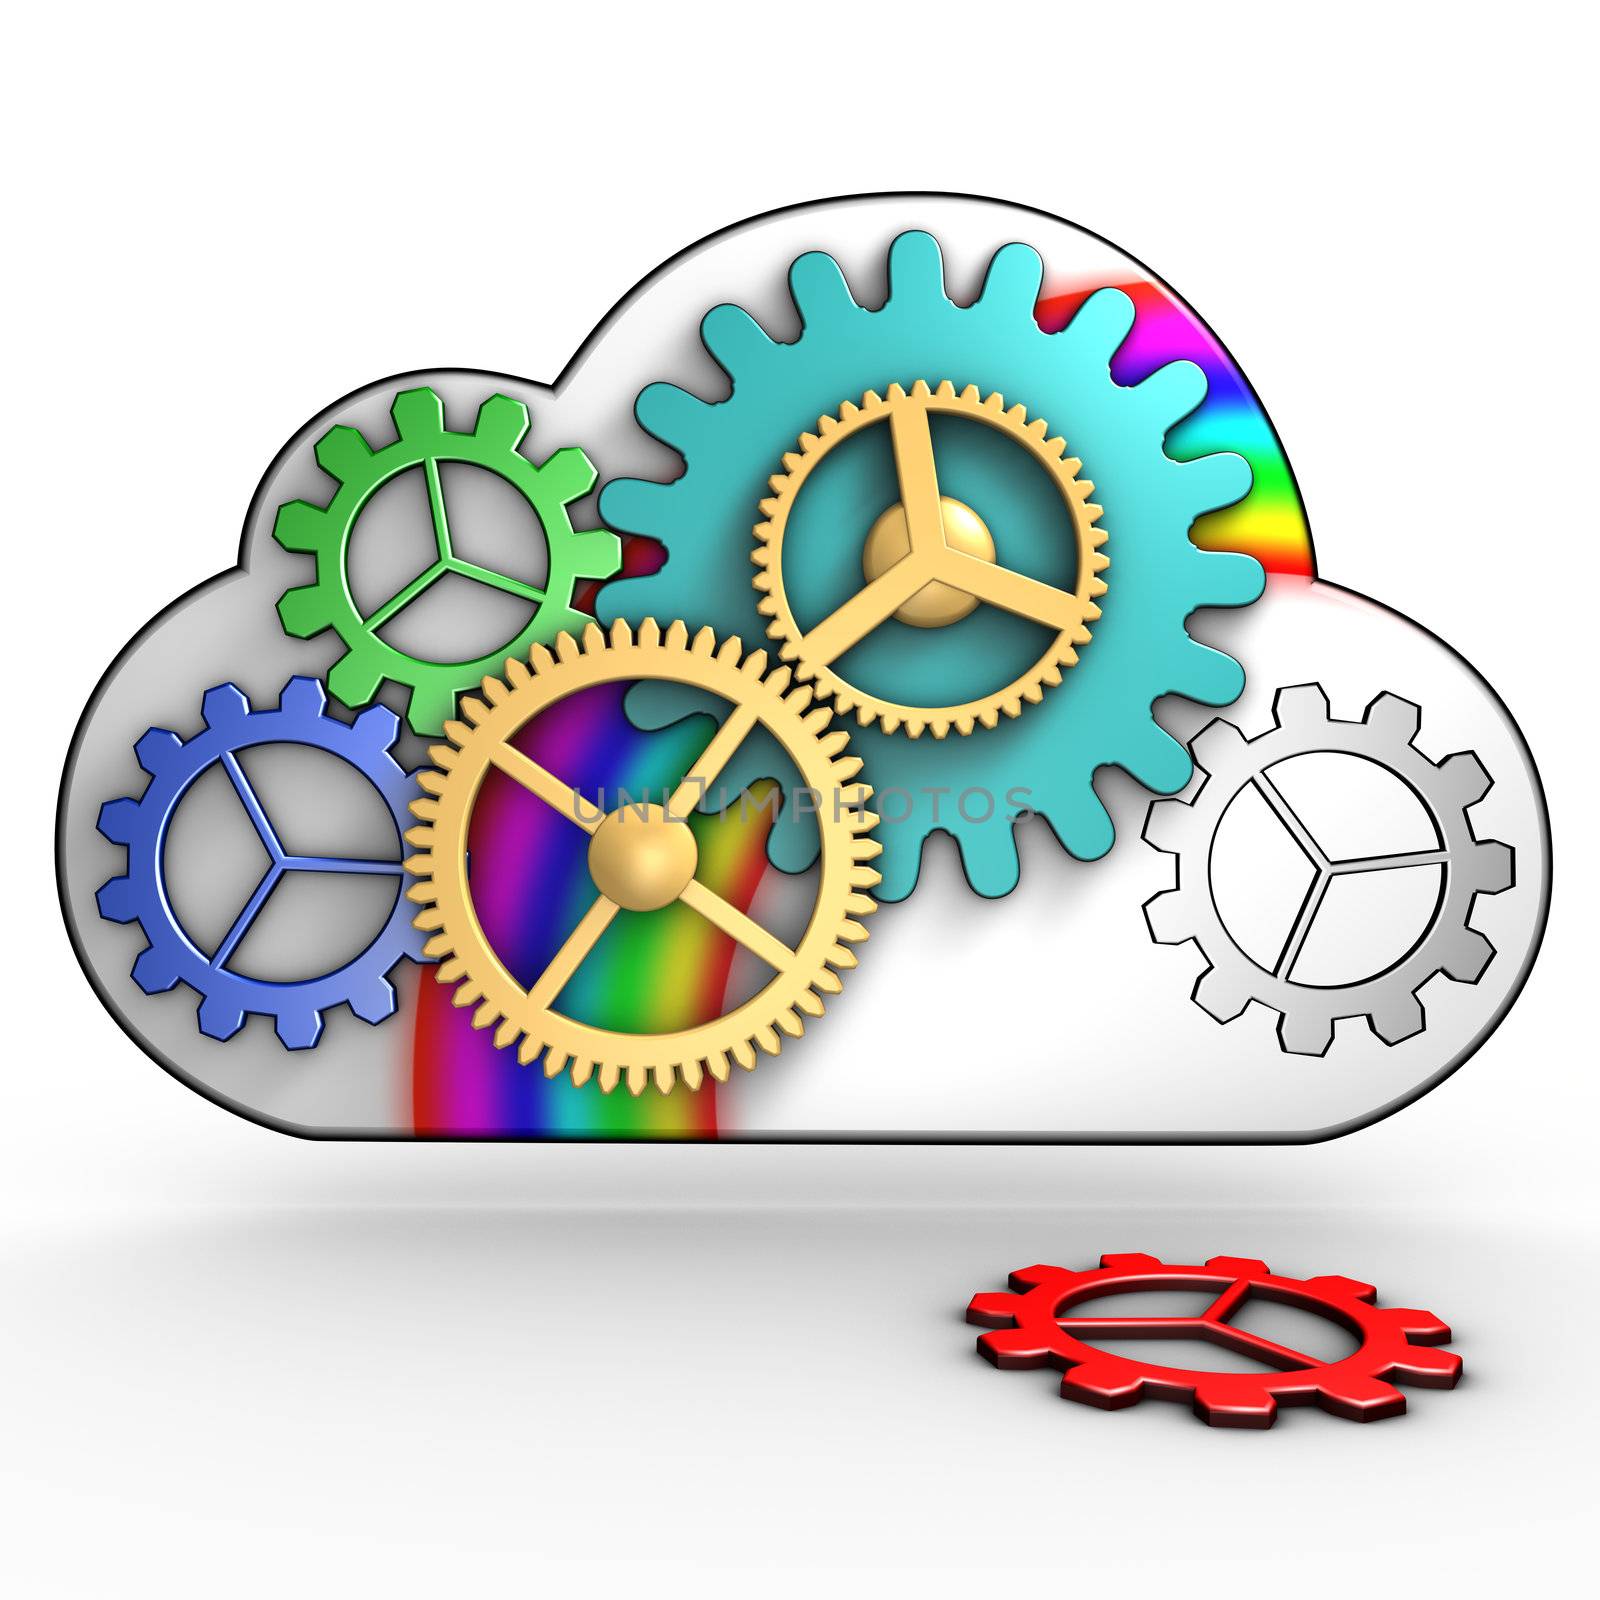 Cloud computing infrastructure by ytjo